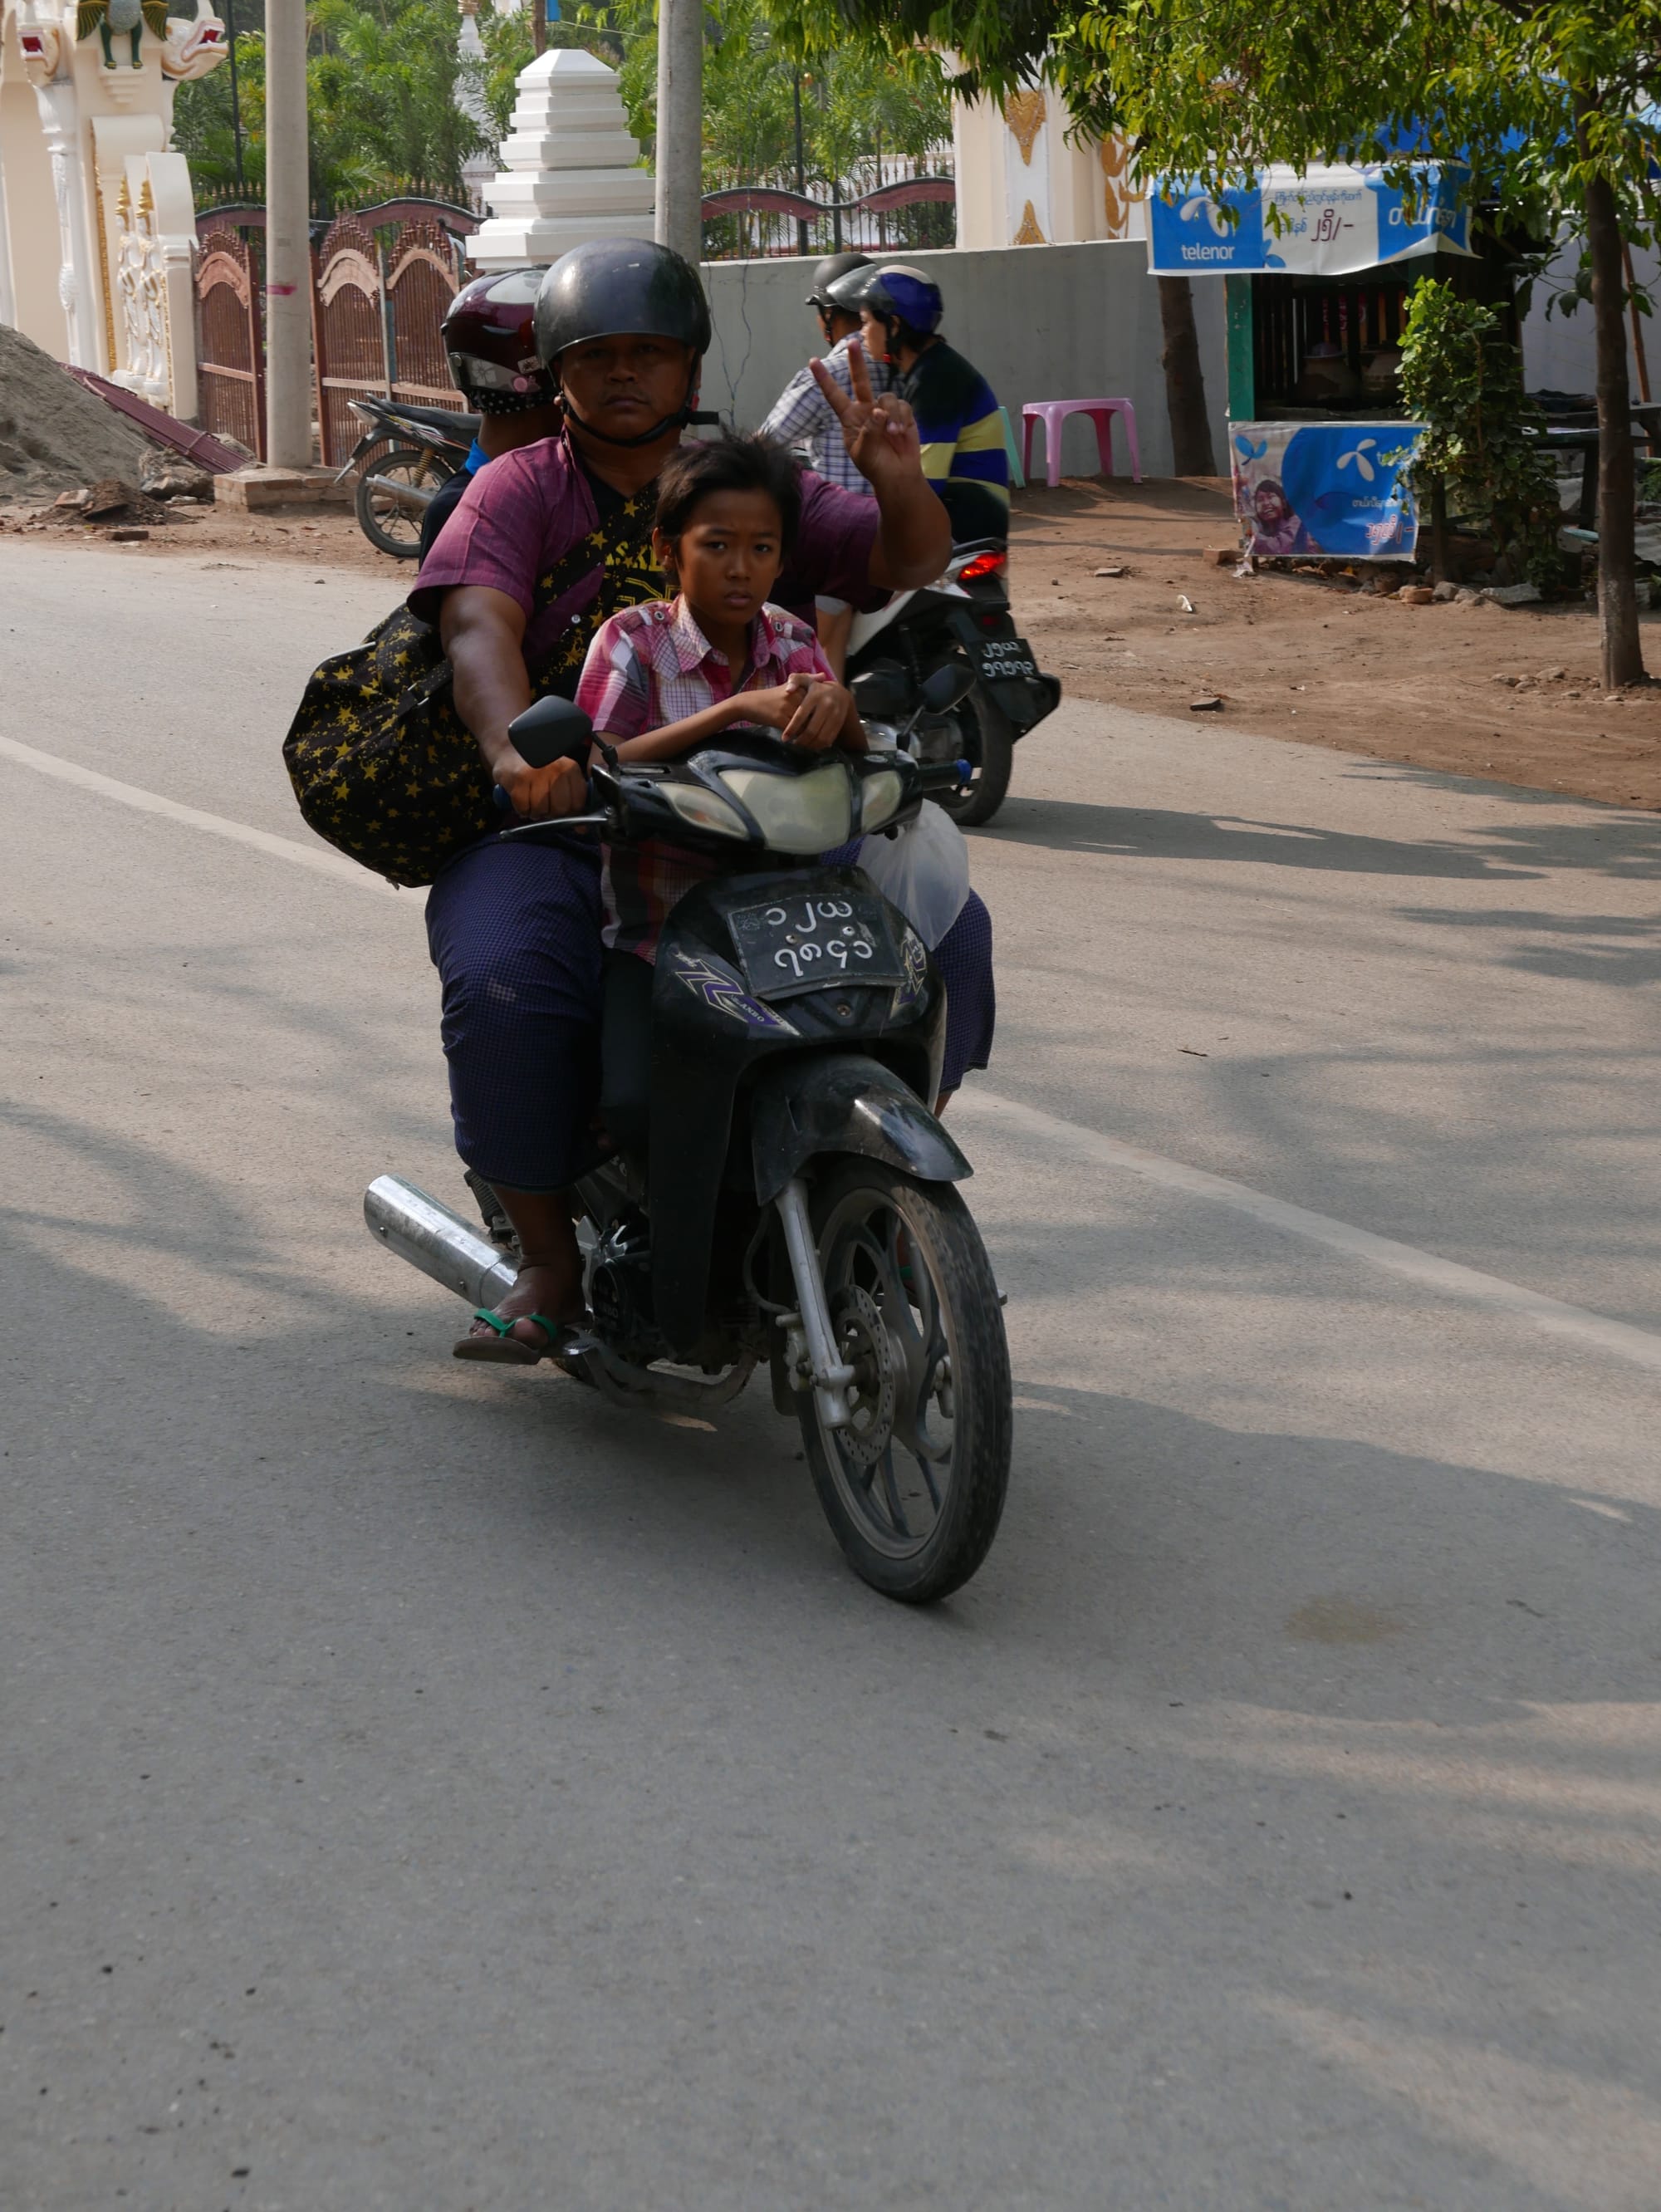 Photo by Author — the motorbikes of Myanmar